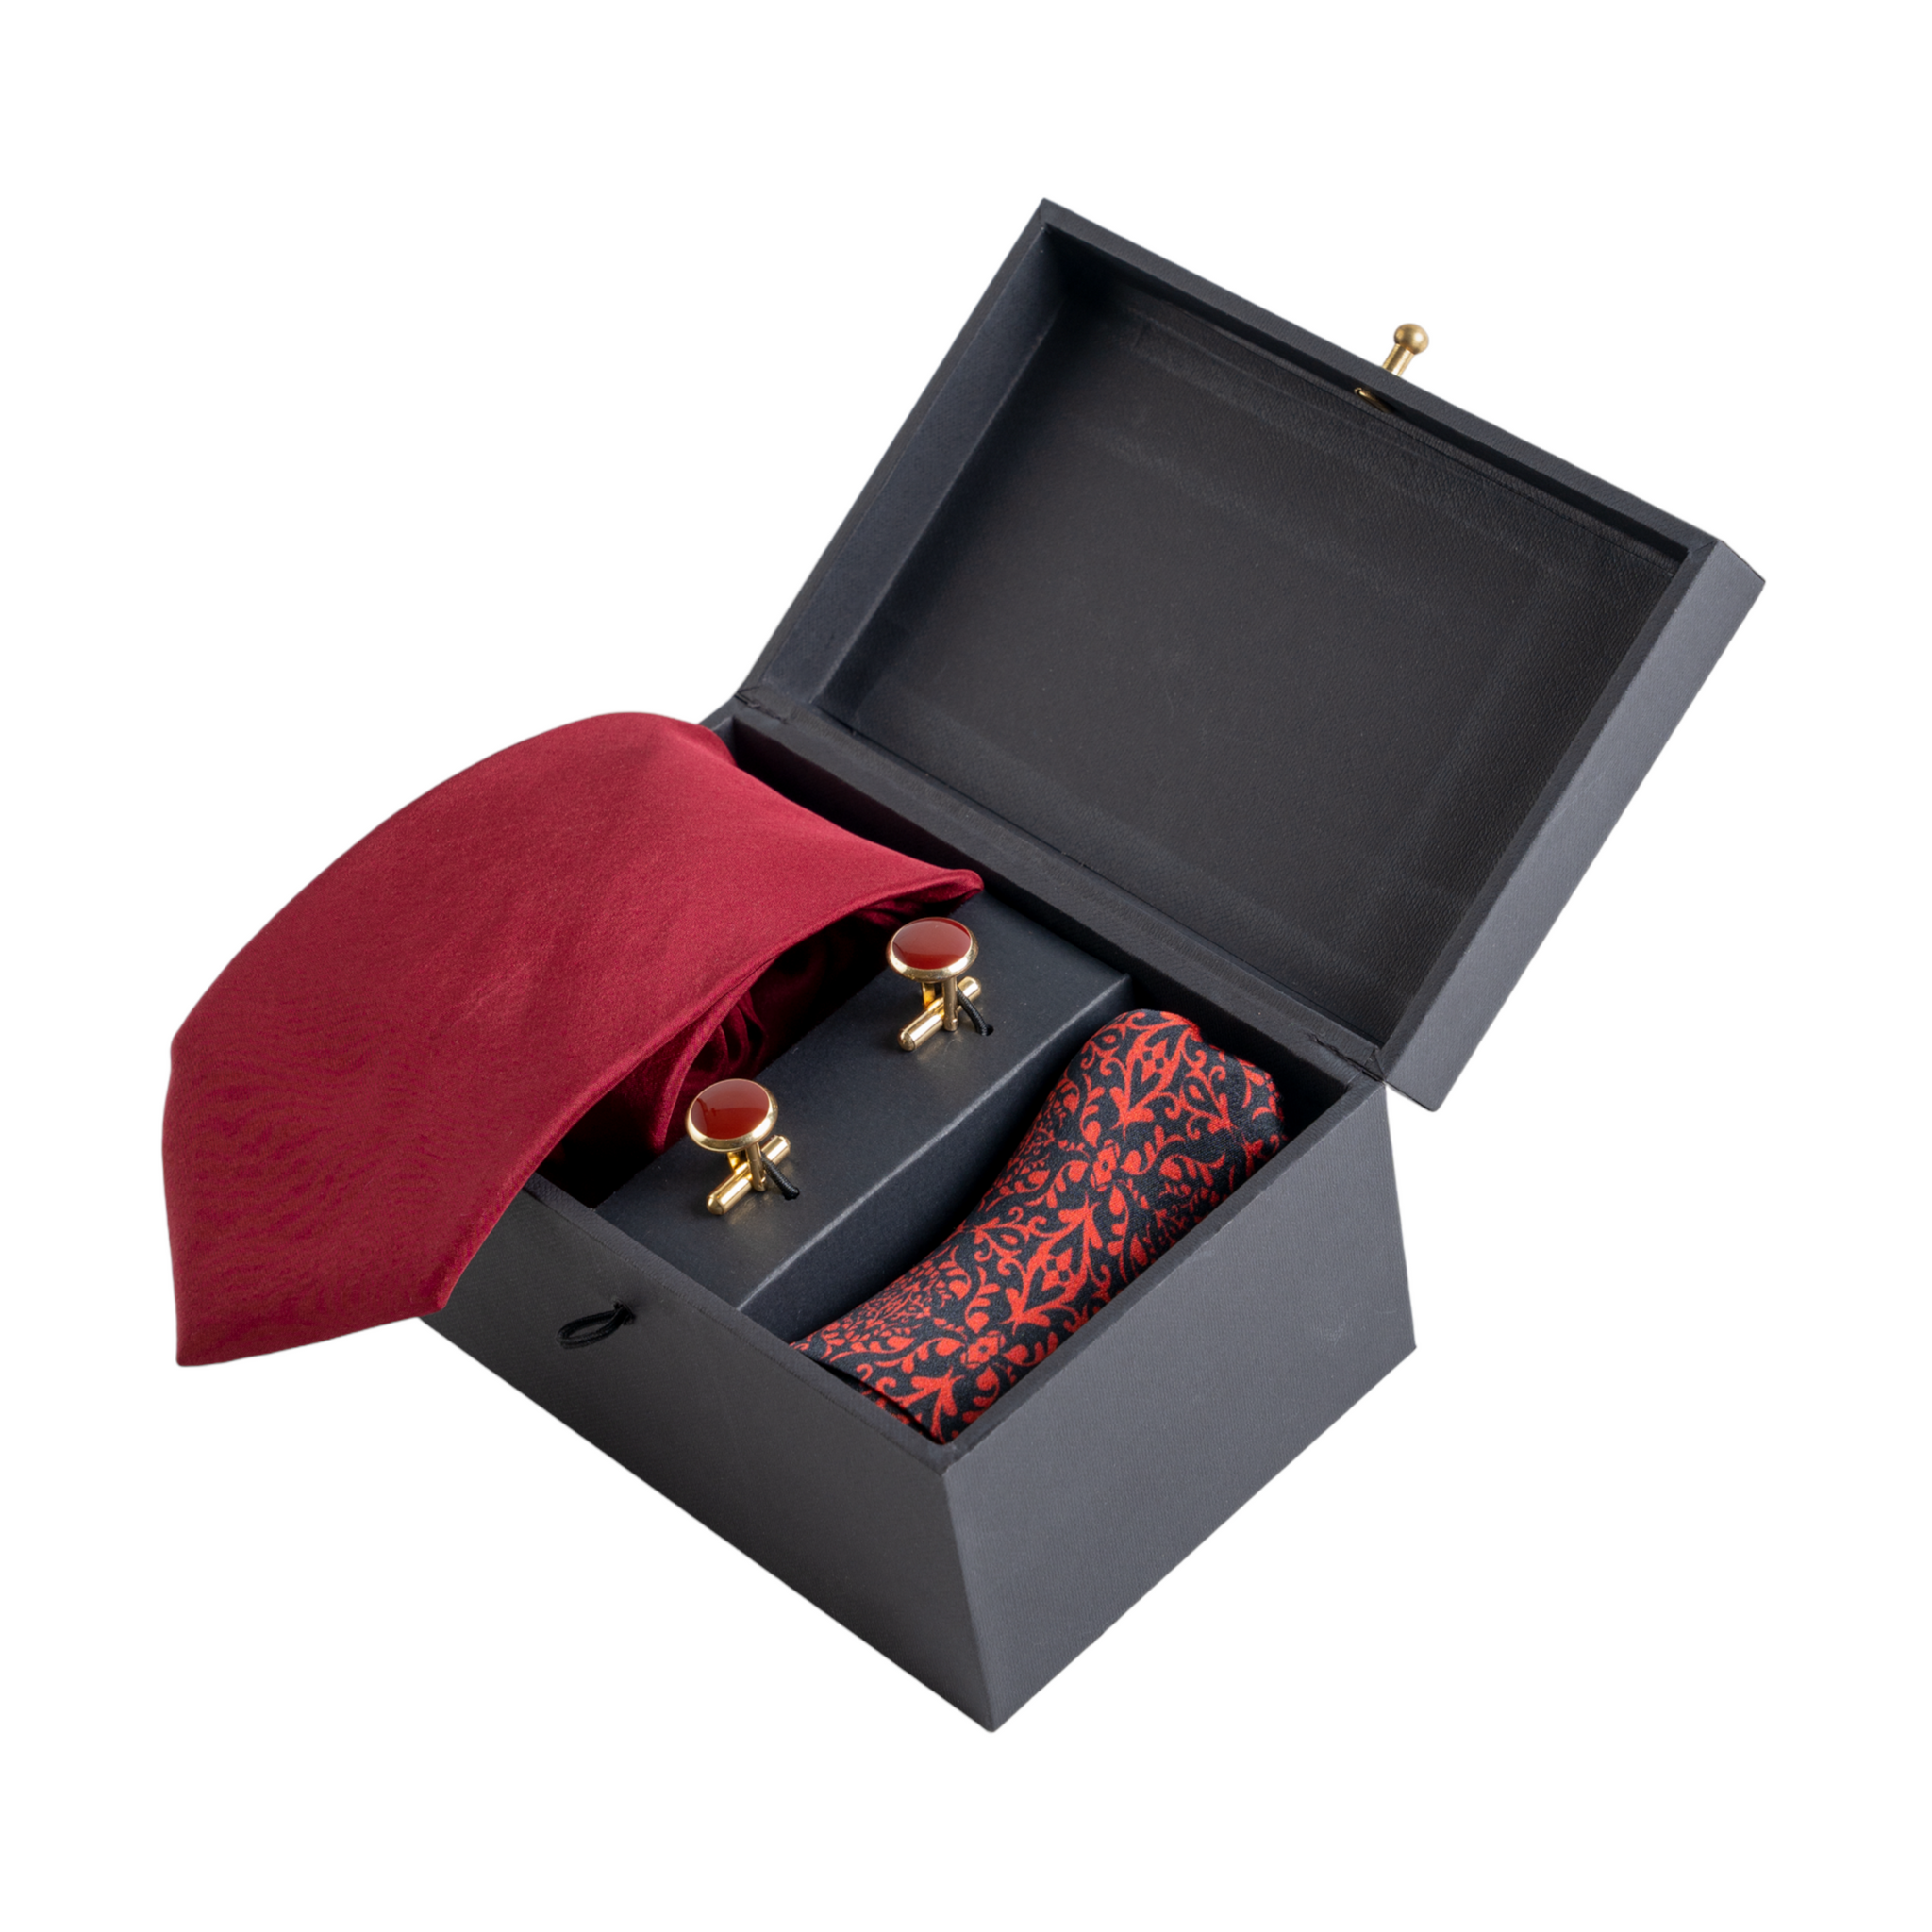 Chokore Special 3-in-1 Indian at Heart Gift Set, Burgundy (Pocket Square, Tie, & Cufflinks)